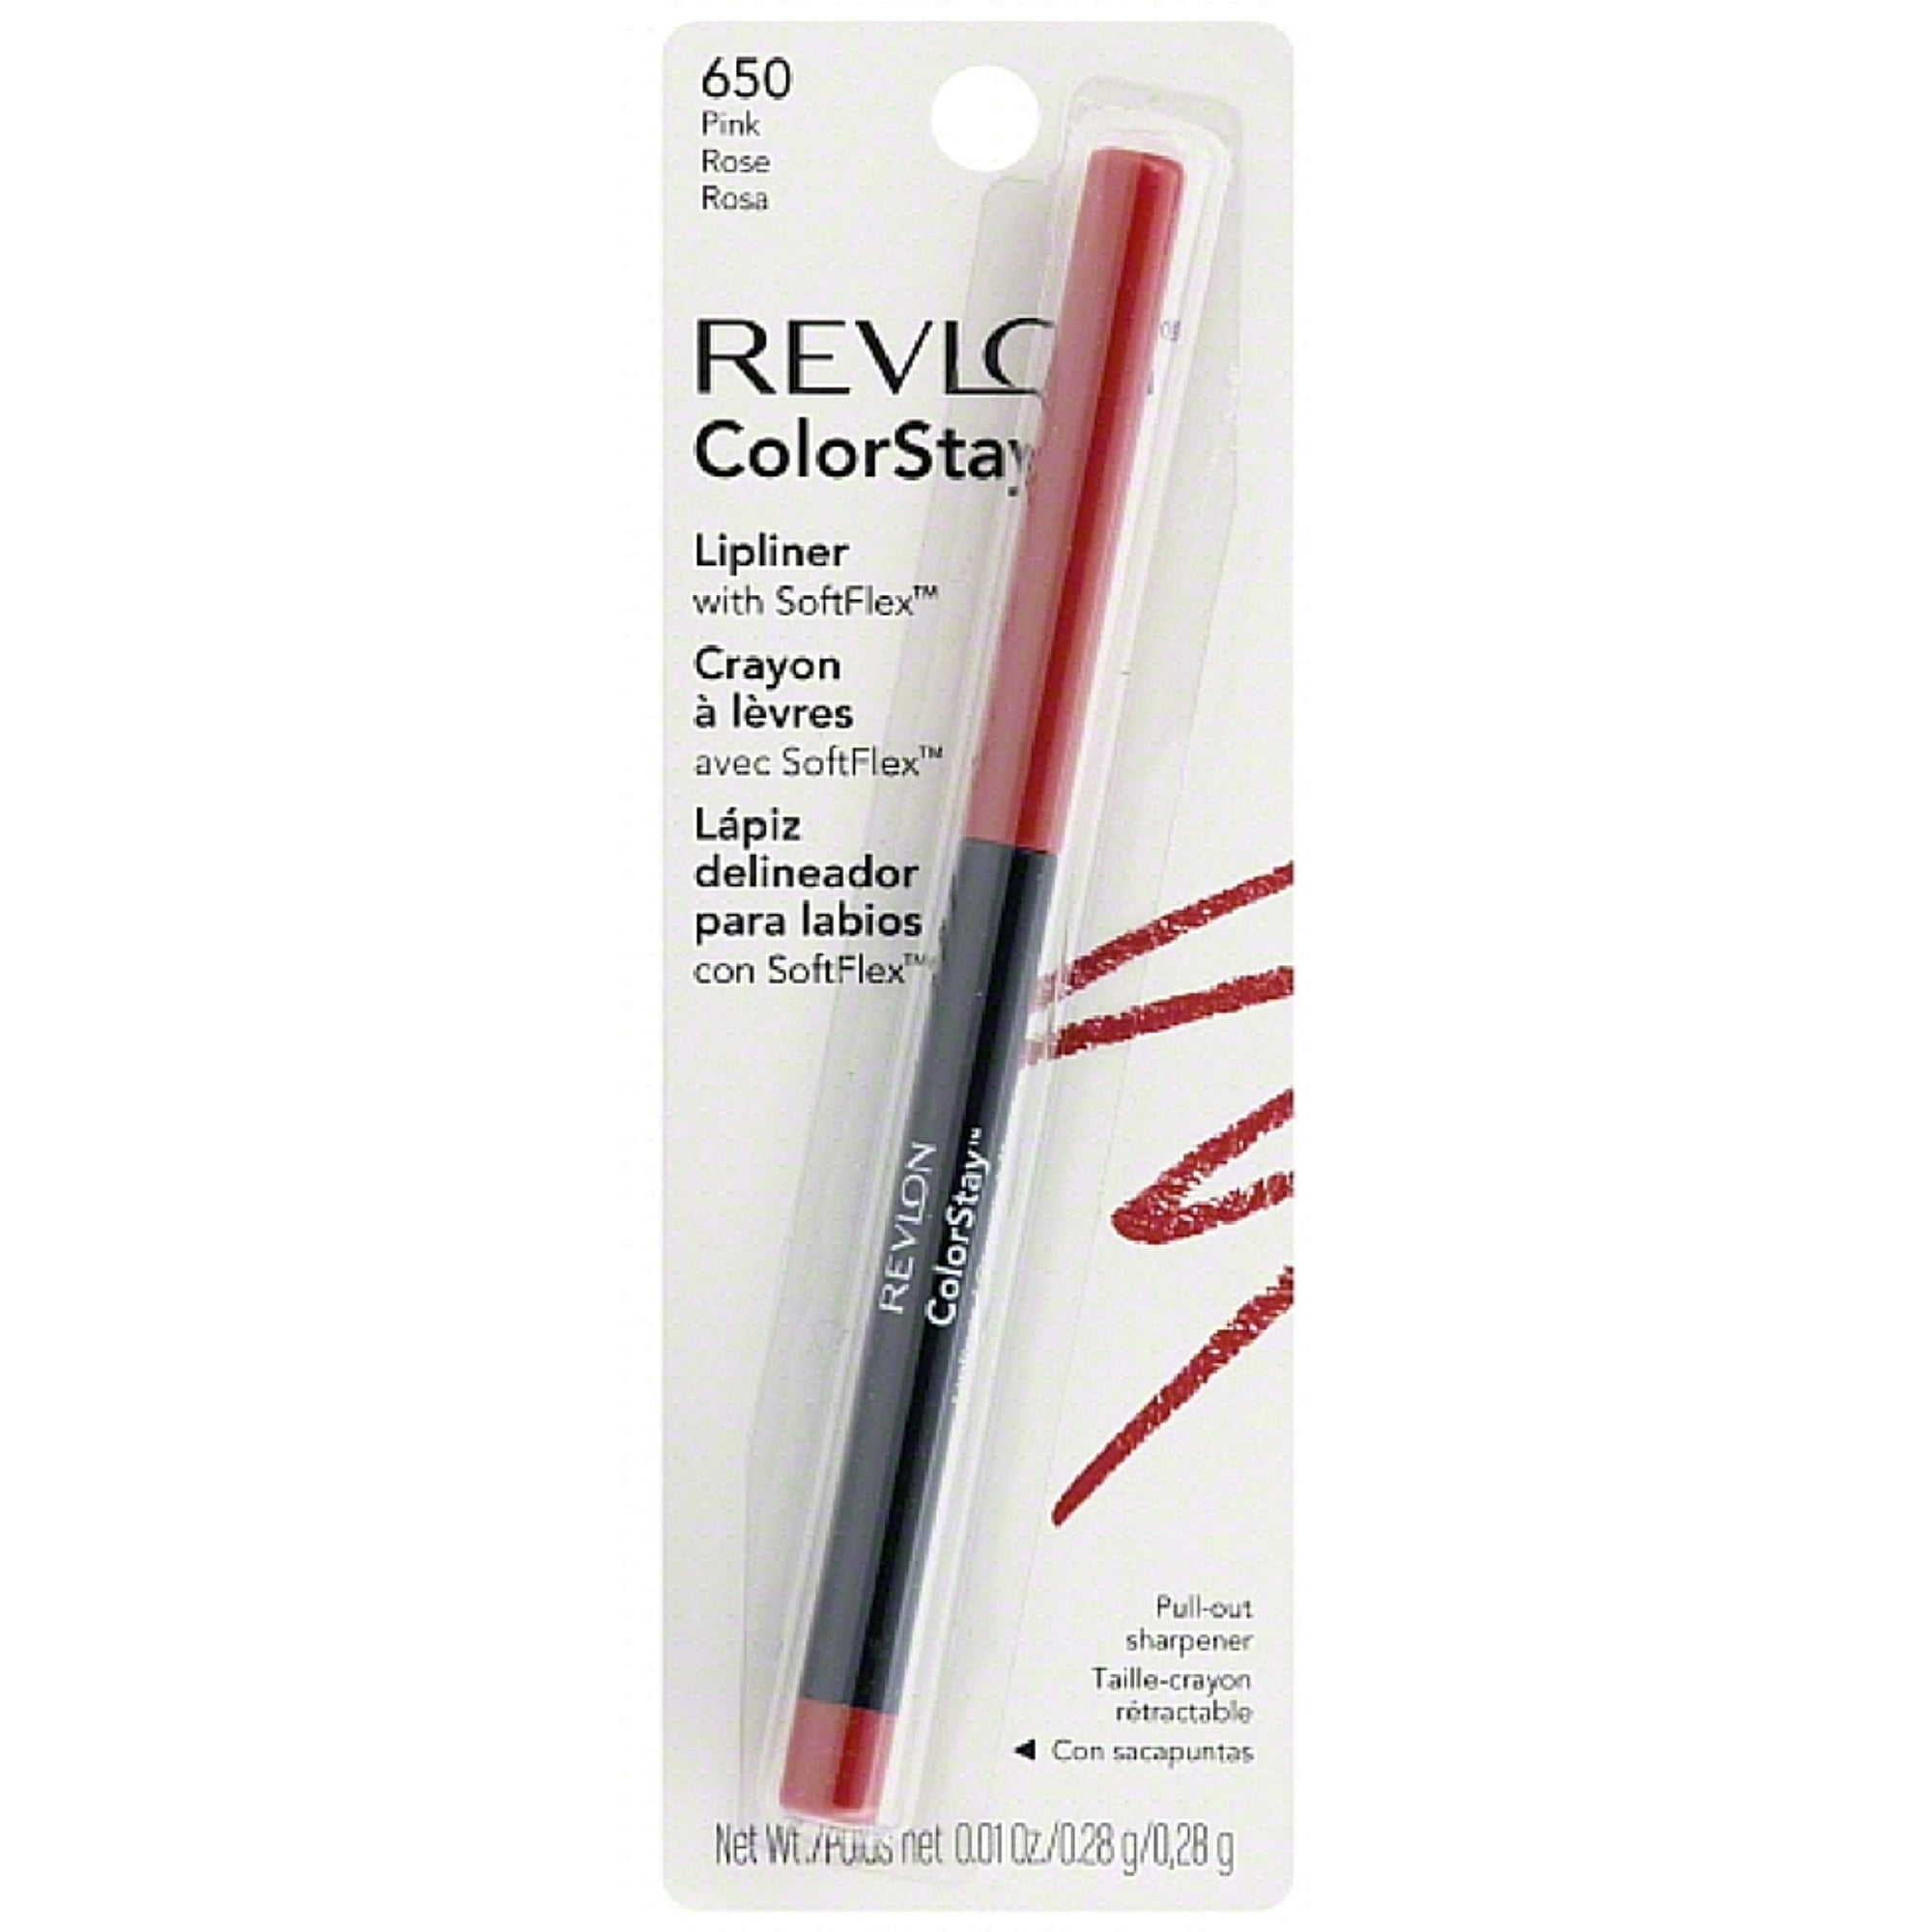 Revlon ColorStay Lip Liner with SoftFlex, Pink [650] 1 ea (Pack of 2)